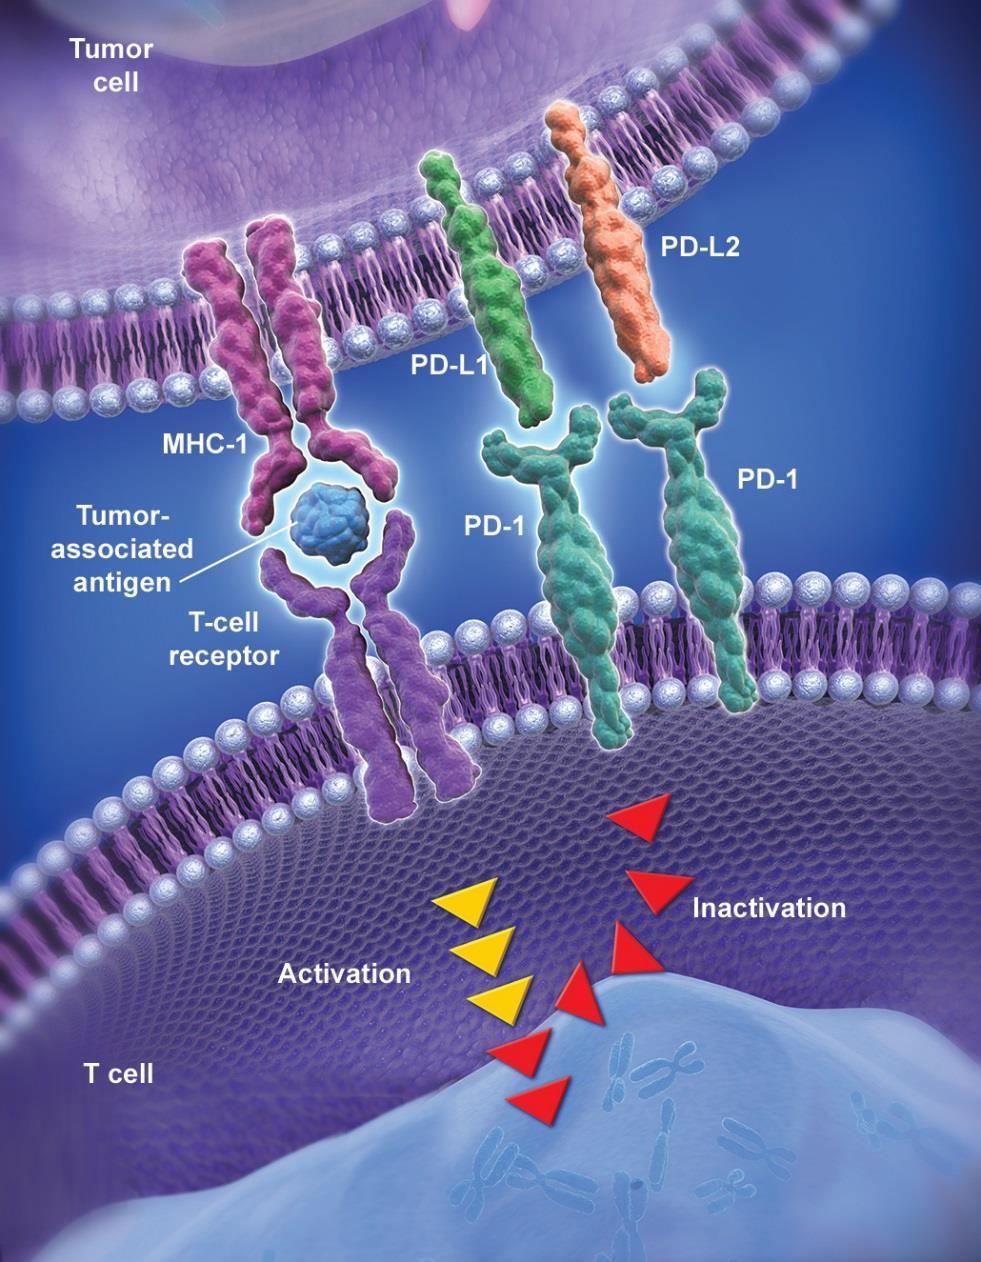 PD-1 and PD-L1/L2 Pathway PD-1 is an immune checkpoint receptor Binding of PD-1 by its ligands PD-L1 or PD-L2 leads to downregulation of T-cell function This mechanism is usurped by many